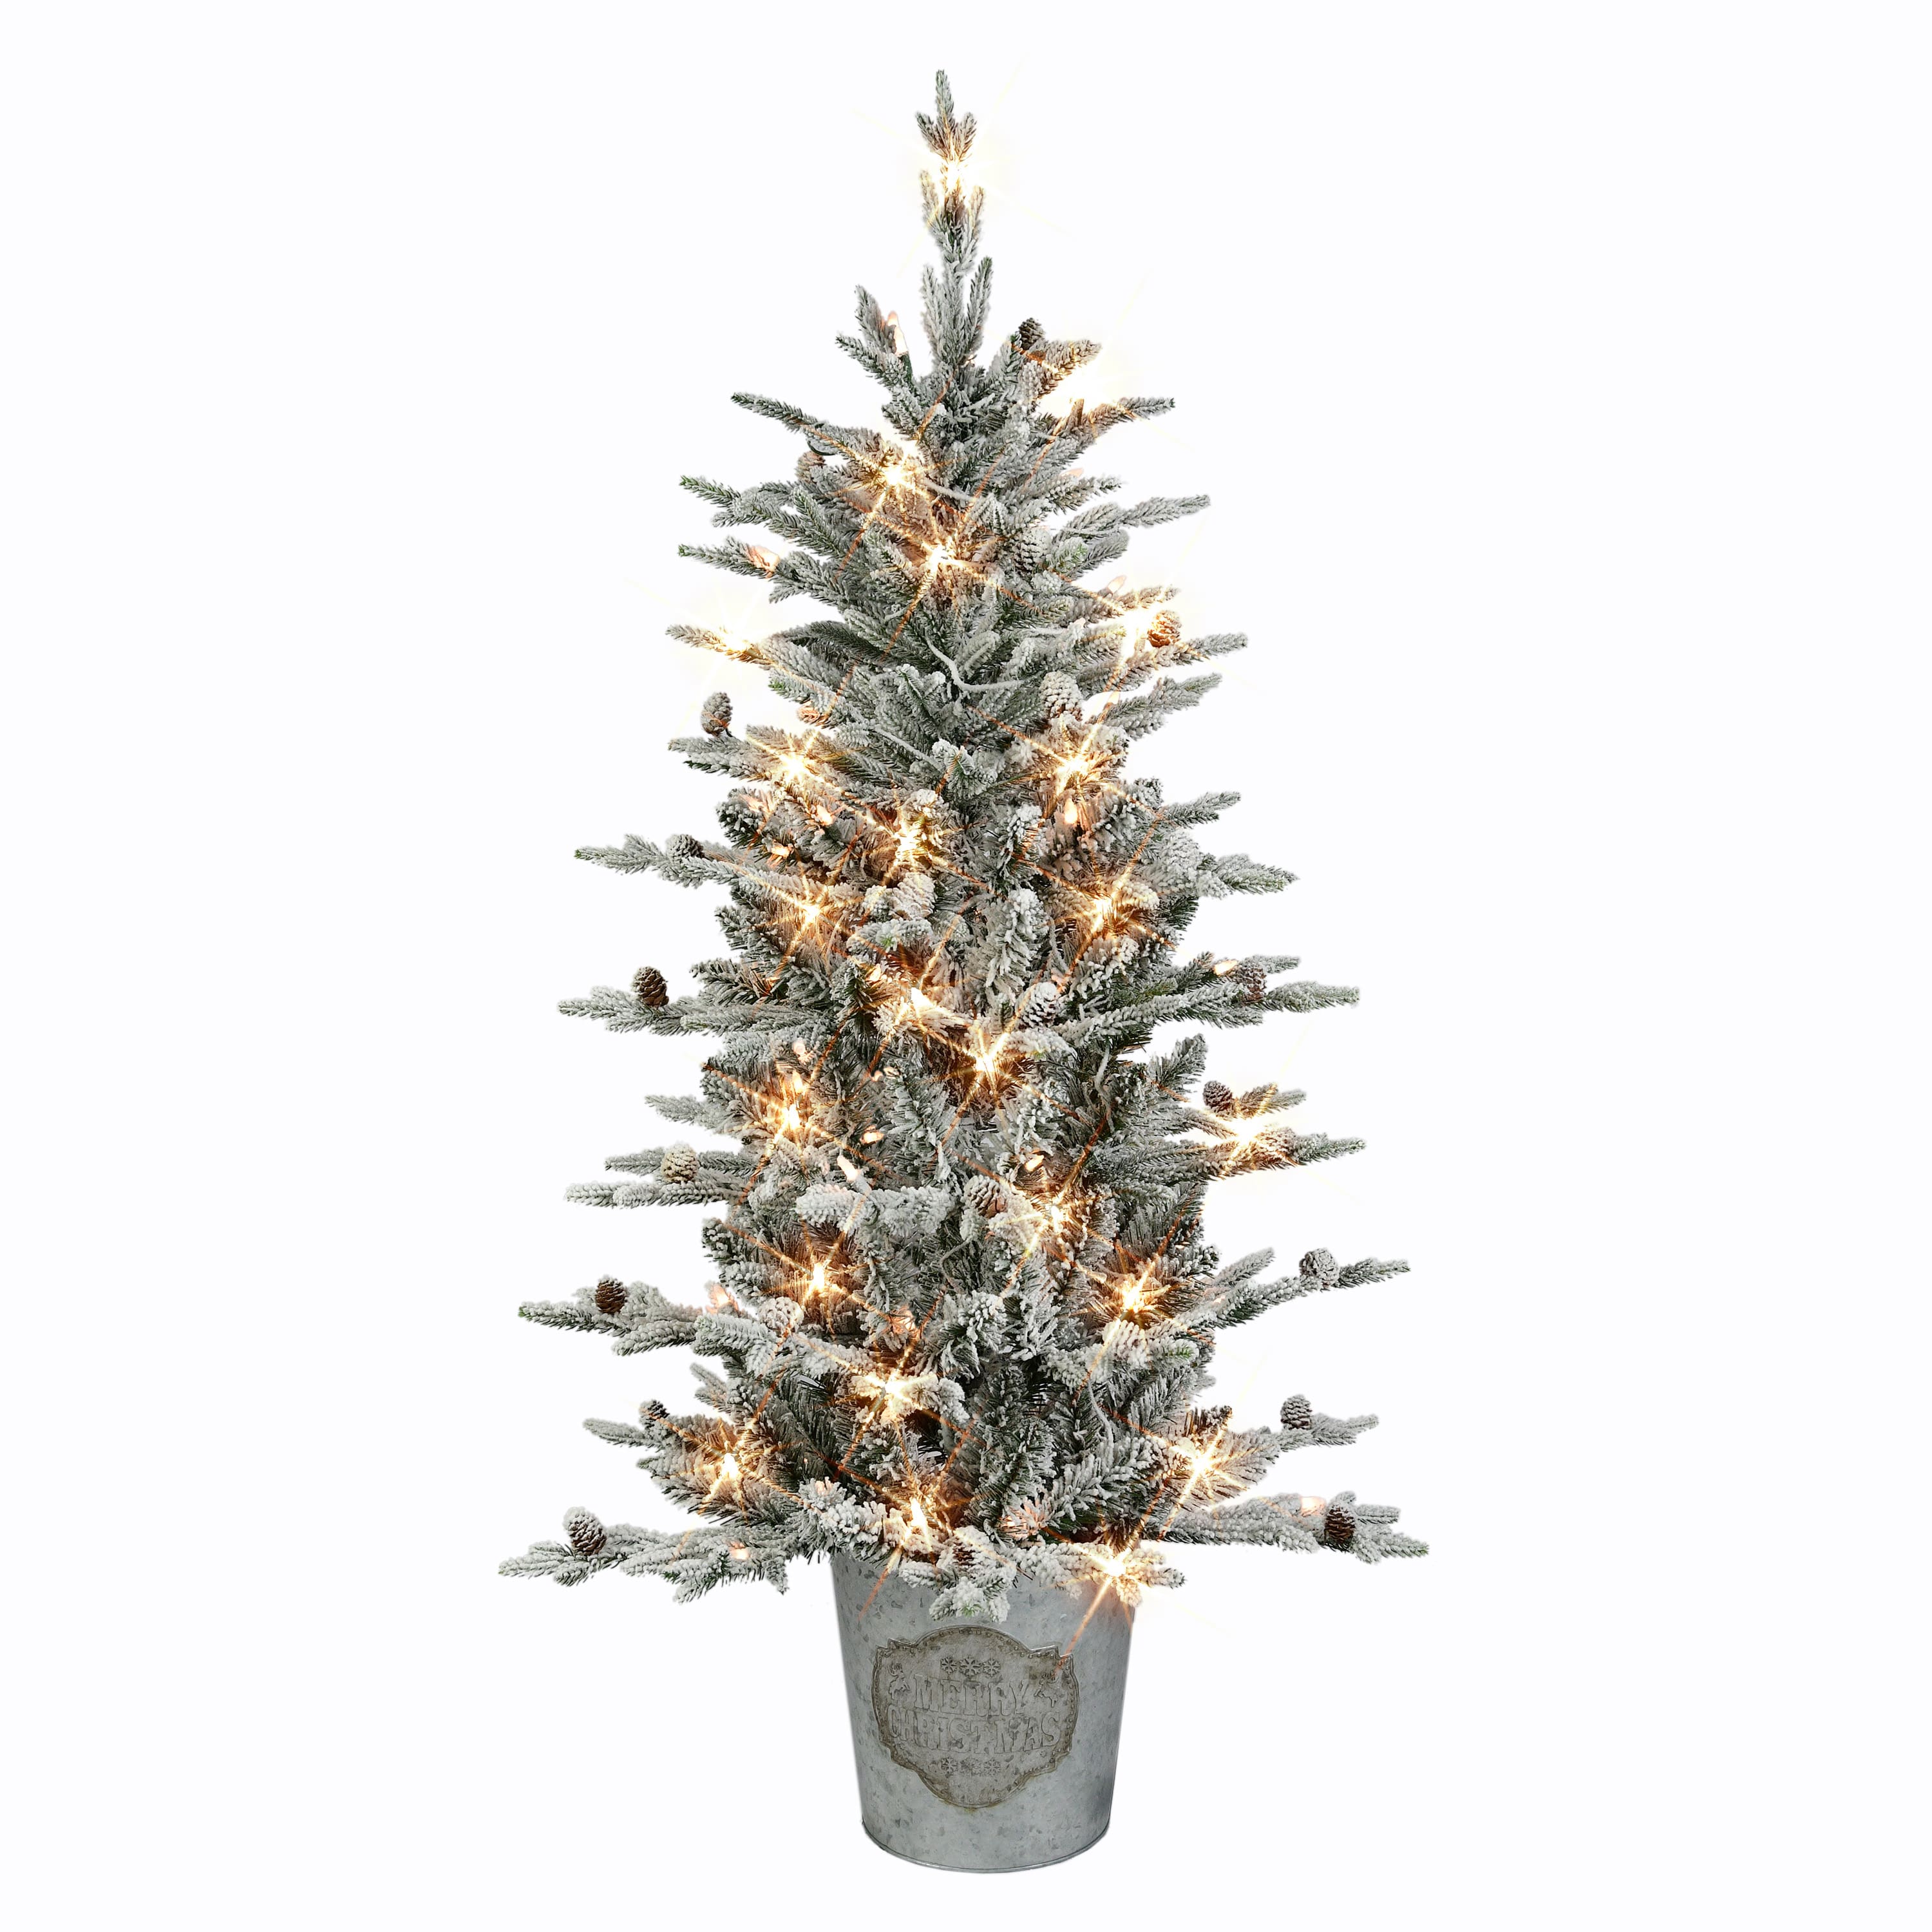 6 Pack: 4.5ft. Pre-Lit Flocked Artificial Christmas Tree in Metal Planter, Clear Lights